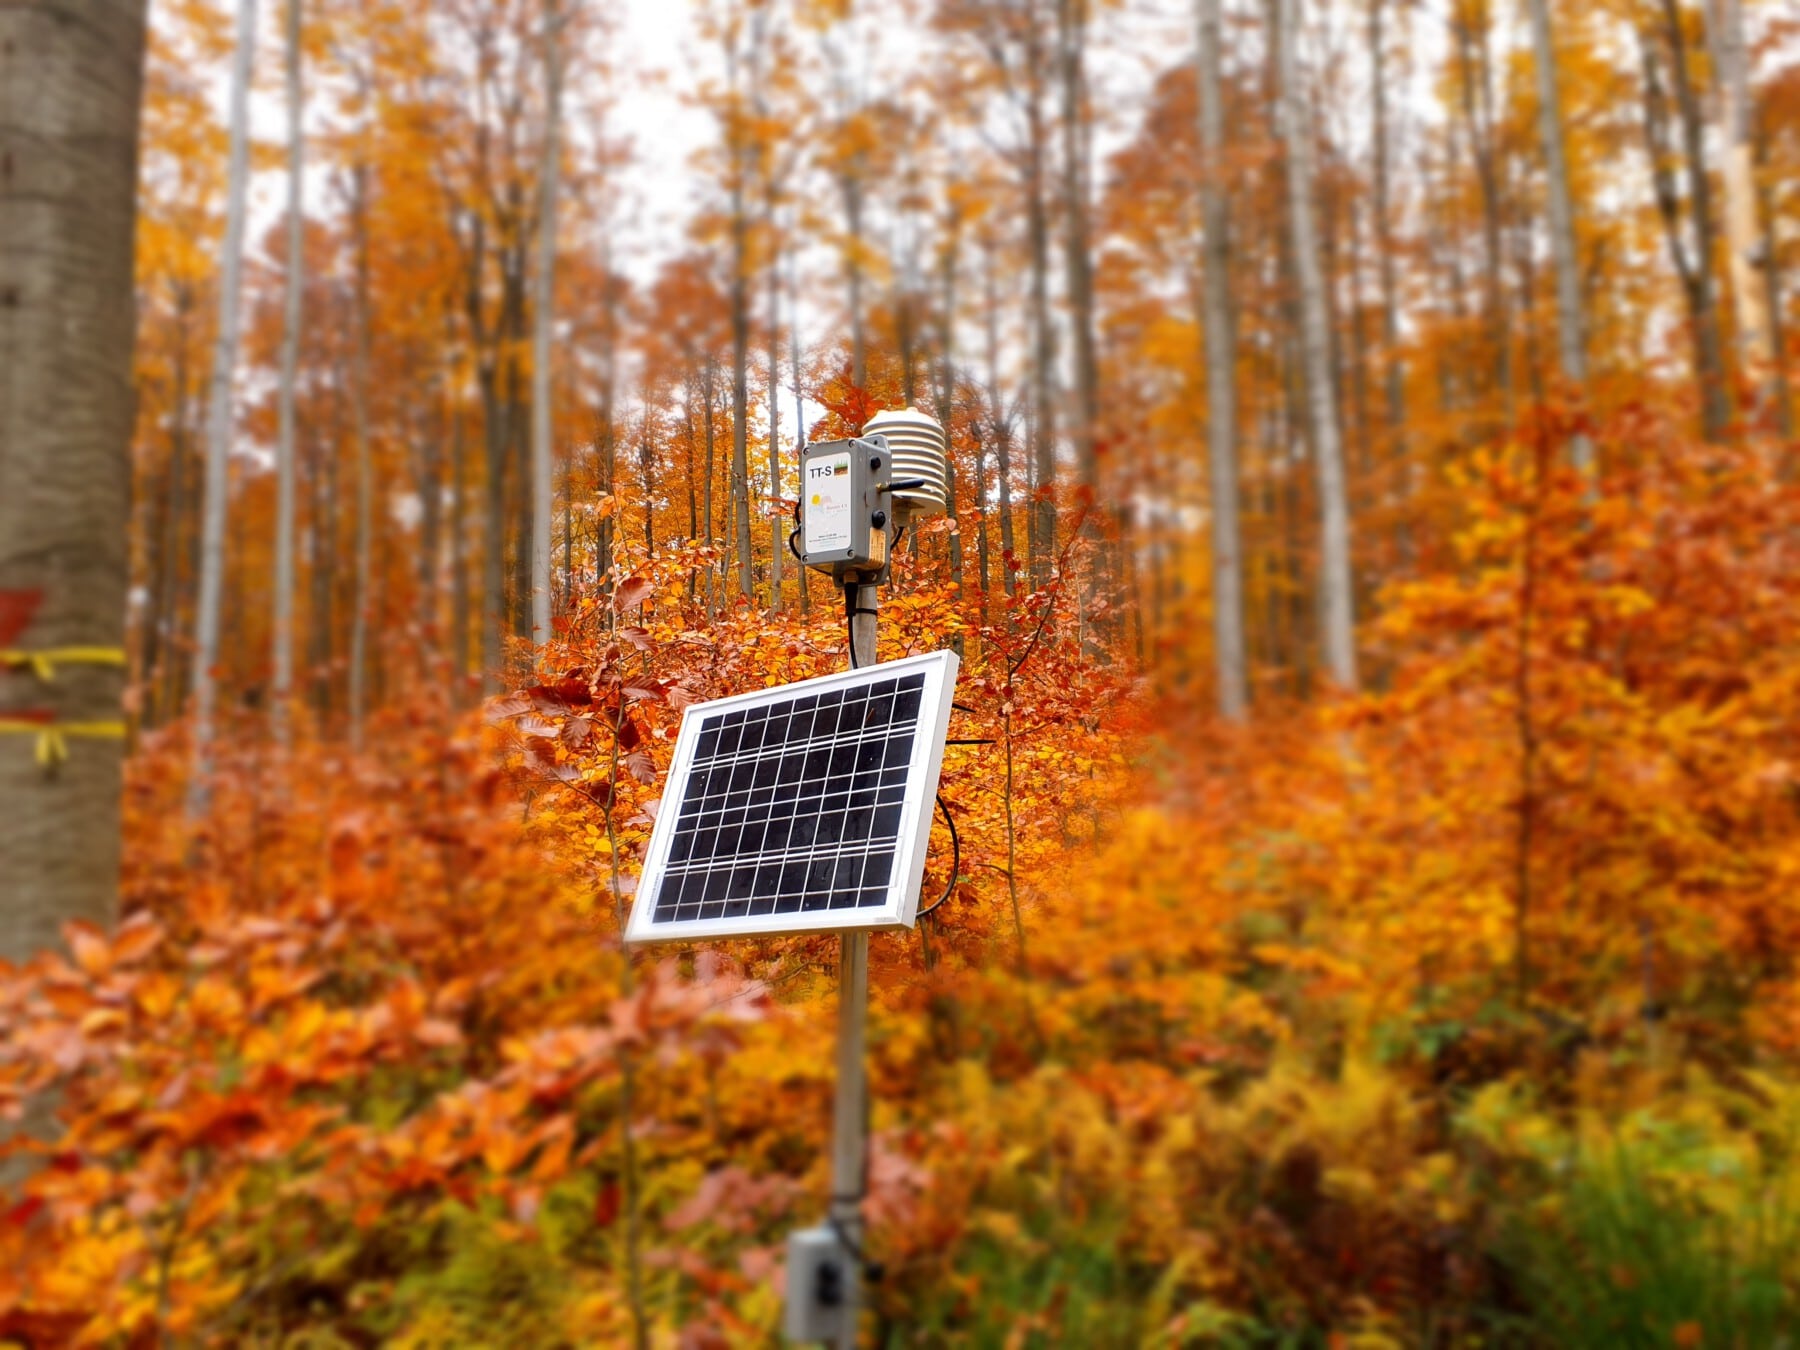 Picture: The photo shows a climate measuring station in an autumn forest with reddish-brown coloured leaves. The station consists of a metal rod stuck in the ground, on which a Treetalker sensor is mounted at the top, and a solar module of approximately DIN A 4 sheet size, which is attached below the sensor.